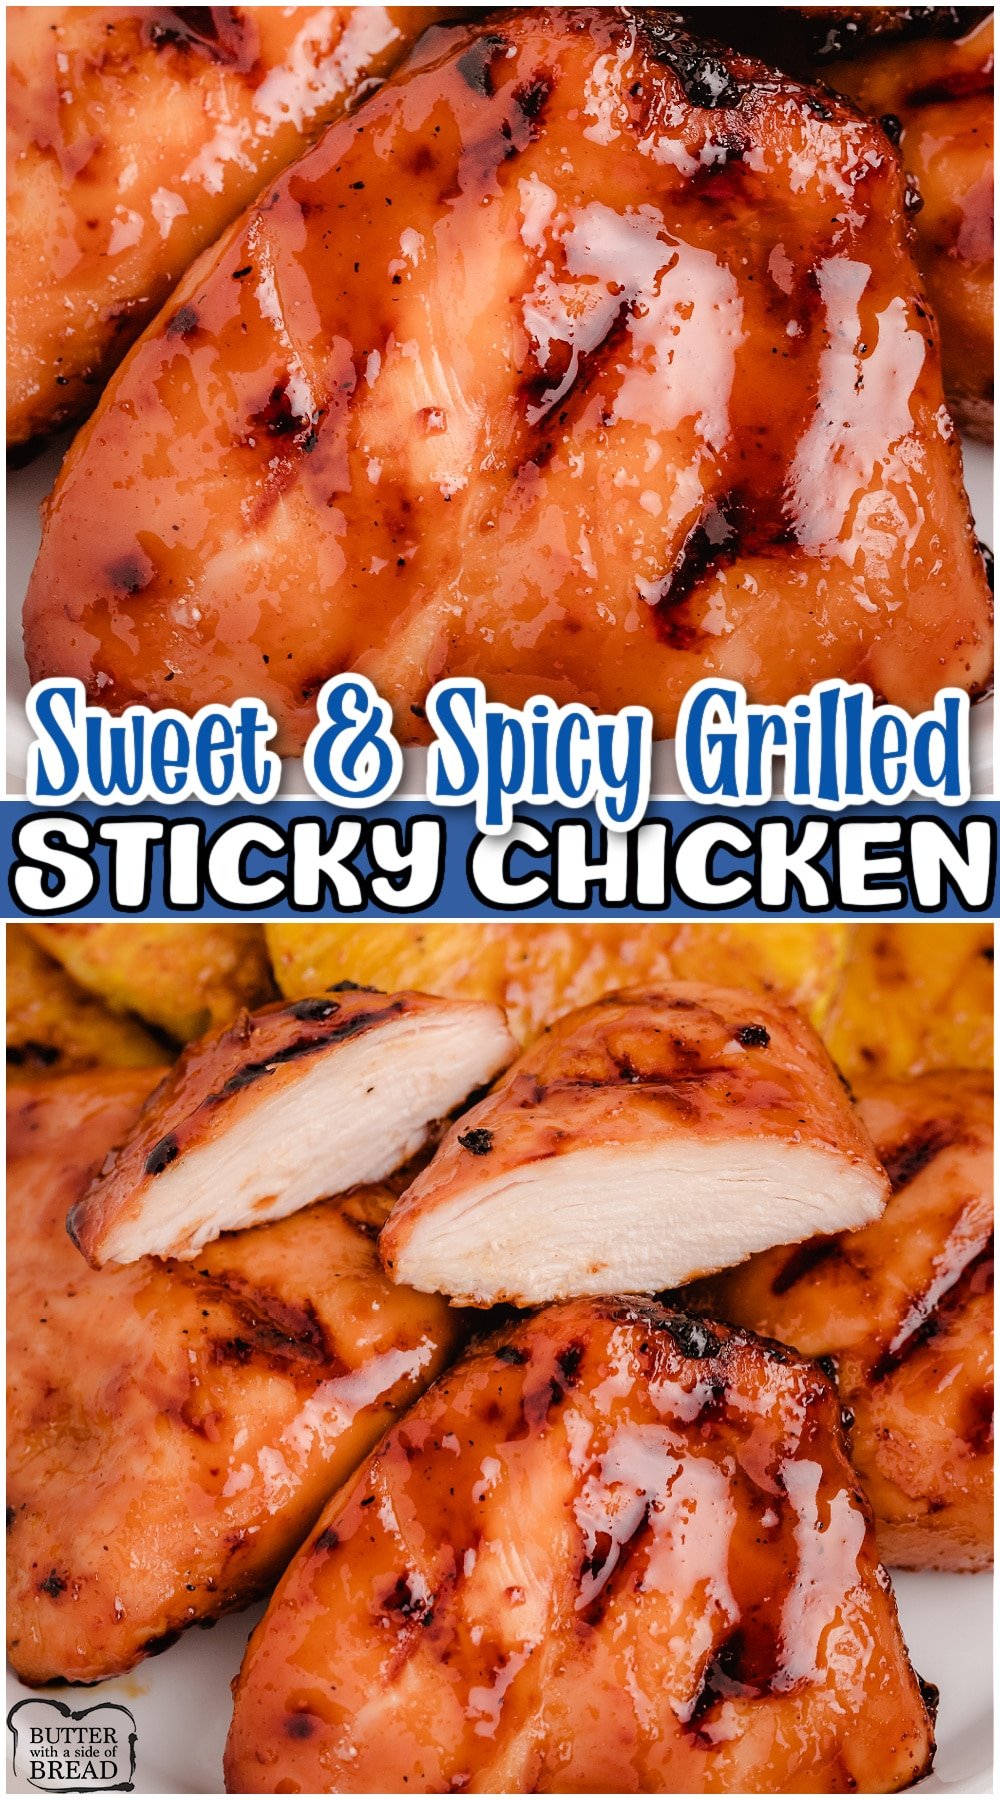 Sweet and Spicy Grilled Sticky Chicken made with basic pantry spices for a fantastic grilled chicken dinner! Sweet & spicy chicken that's tender, juicy & super easy to make!